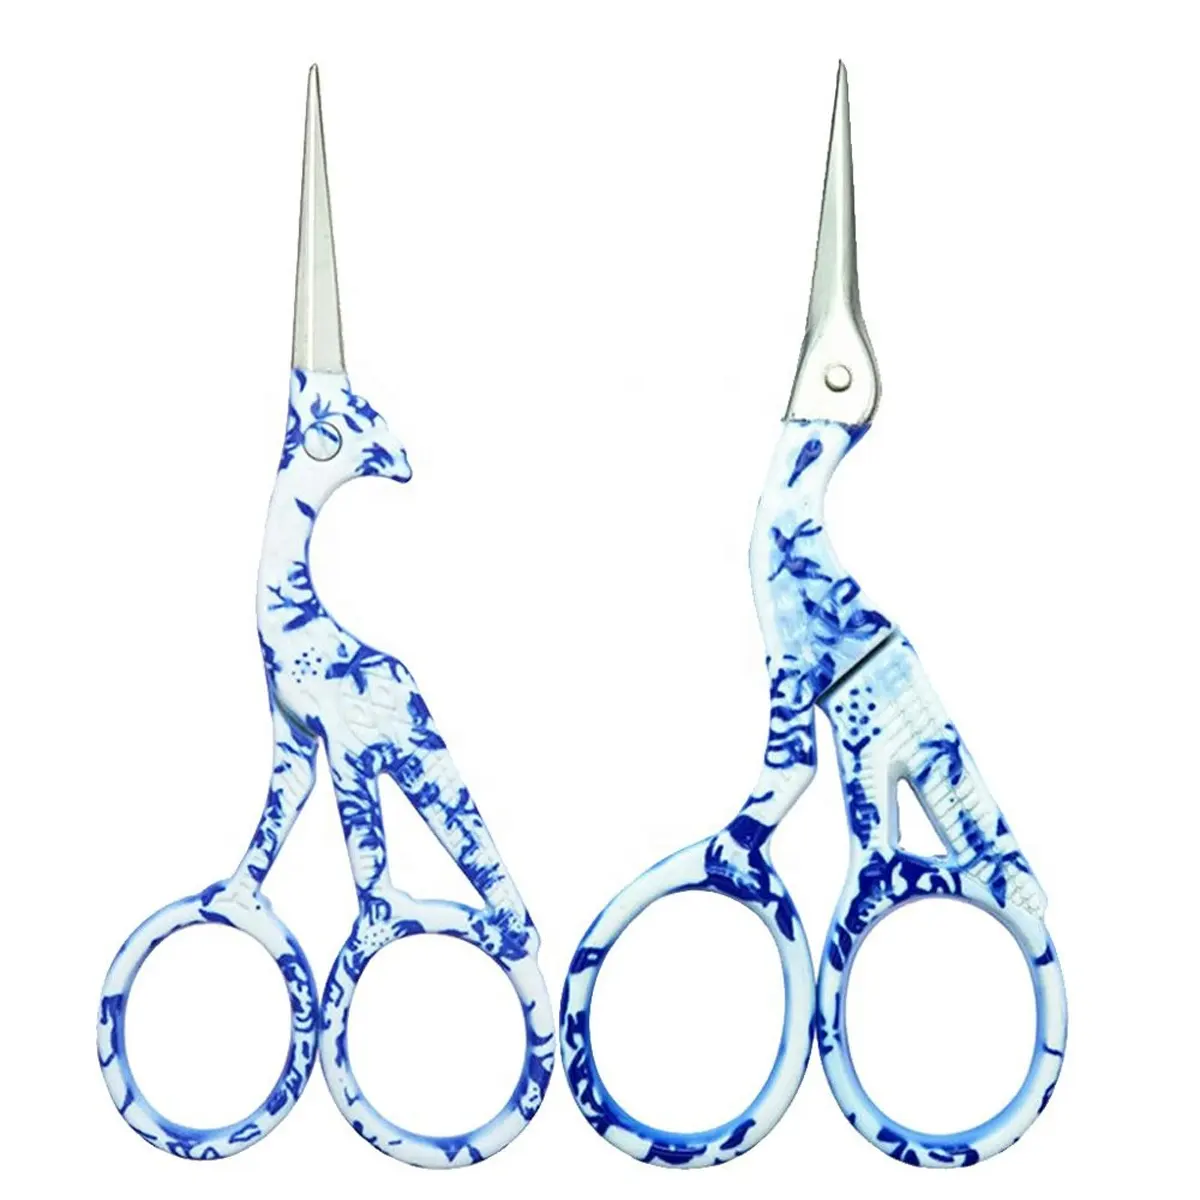 Best Company Pissco For Embroidery Curved Scissors | Scissor For Embroidery Japanese Material Stainless Steel Free Samples